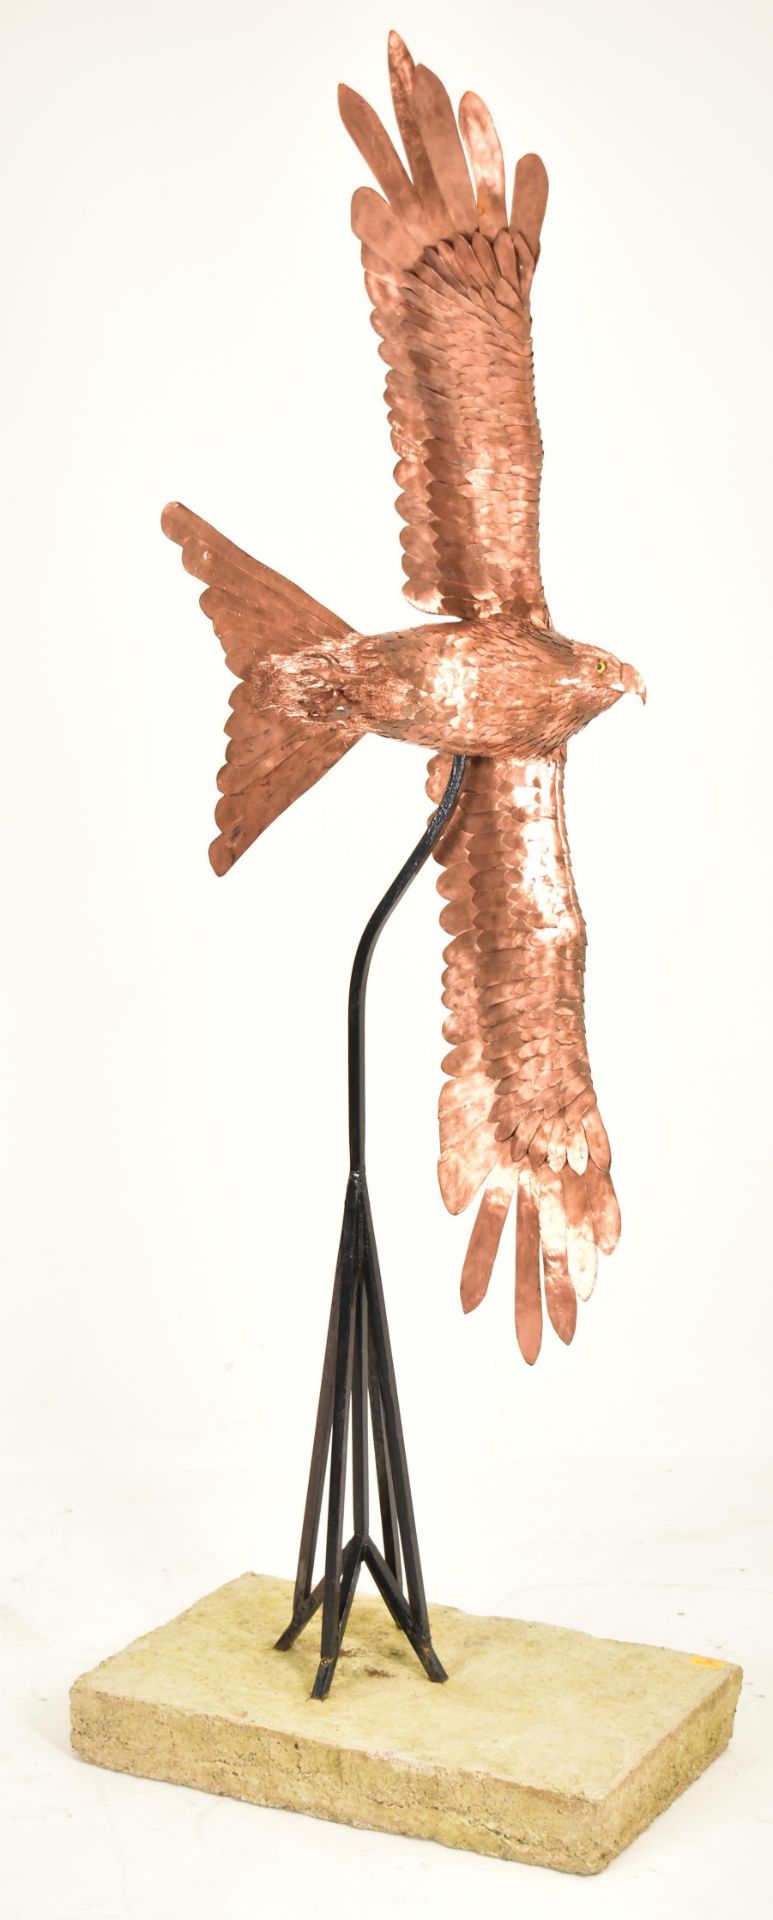 BOB ROWLEY - CONTEMPORARY COPPER WORKED RED KITE SCULPTURE